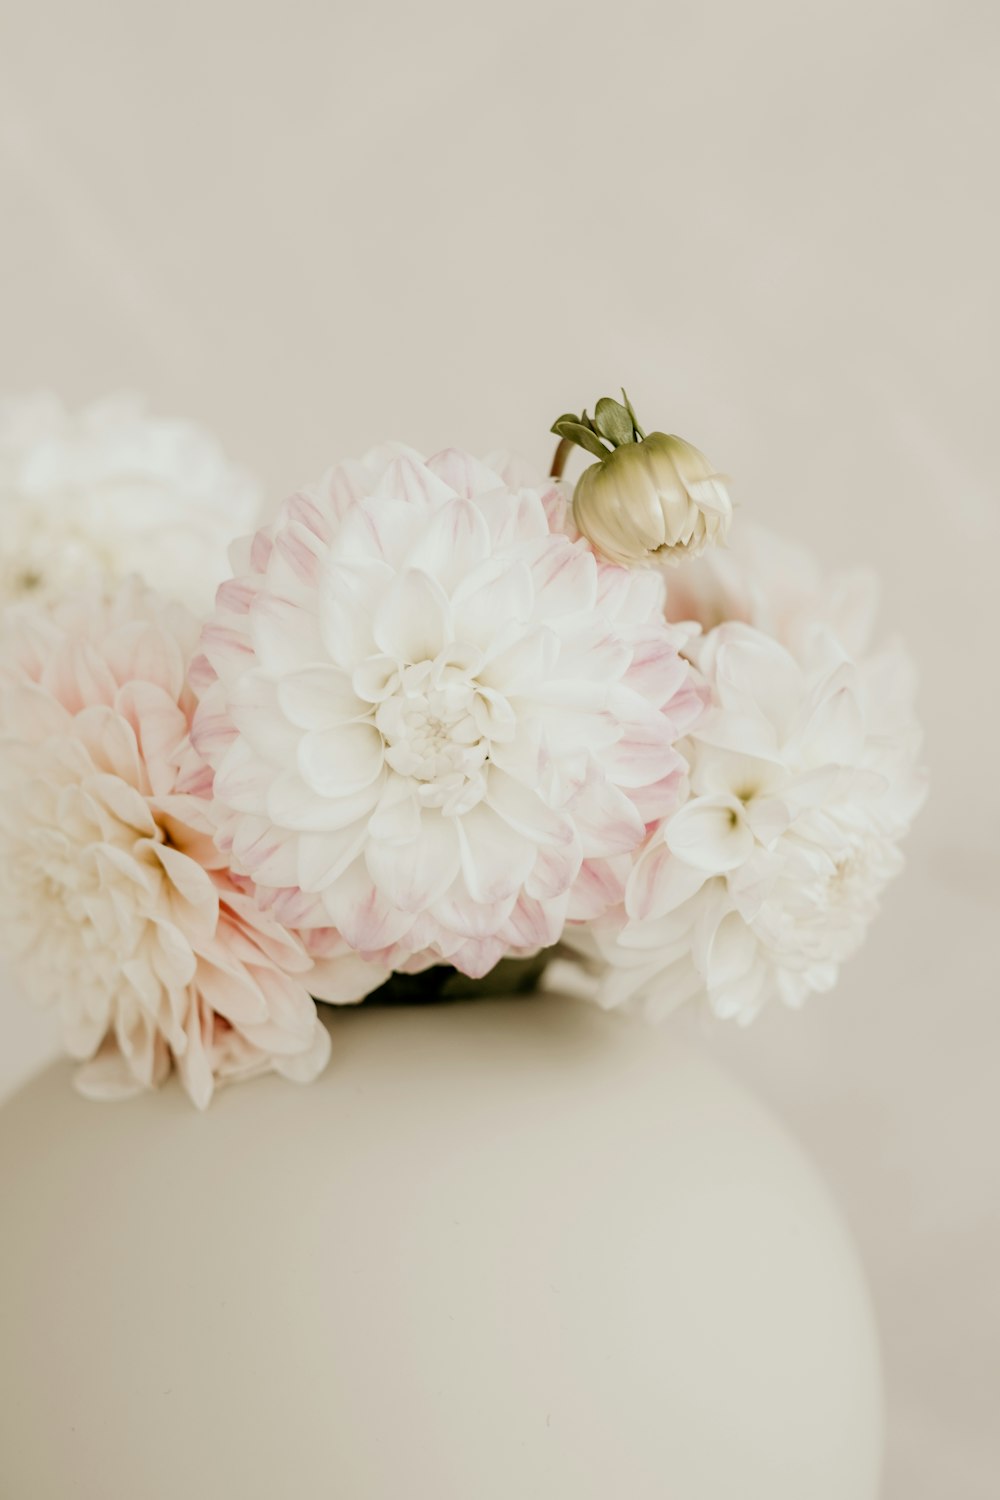 a white vase filled with pink and white flowers